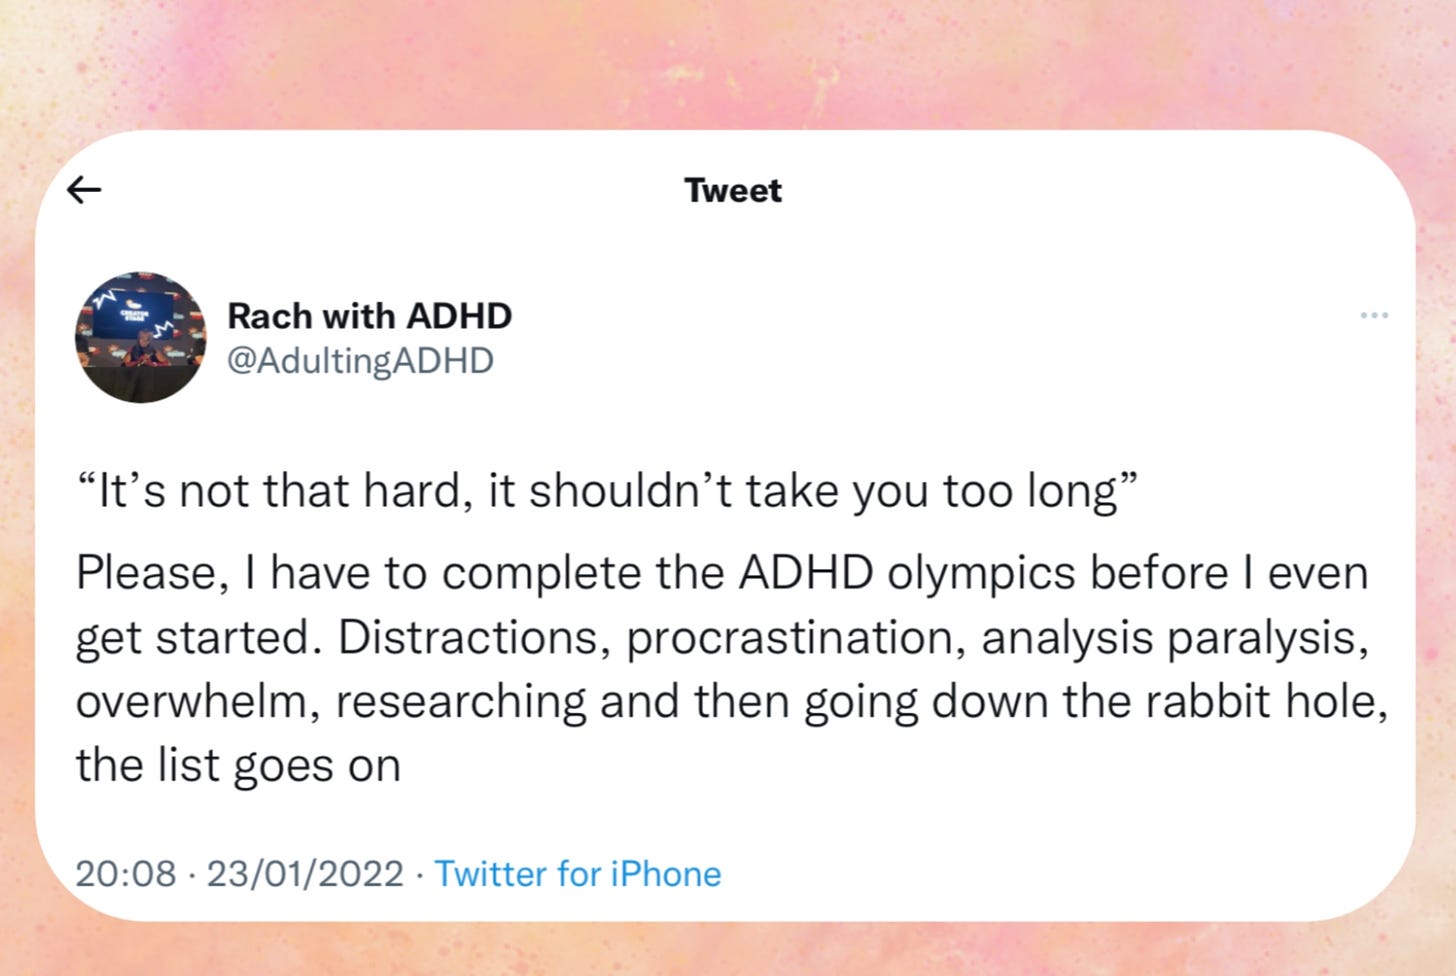 My tweet that says: “It’s not that hard, it shouldn’t take you too long” Please, I have to complete the ADHD olympics before I even get started. Distractions, procrastination, analysis paralysis, overwhelm, researching and then going down the rabbit hole, the list goes on